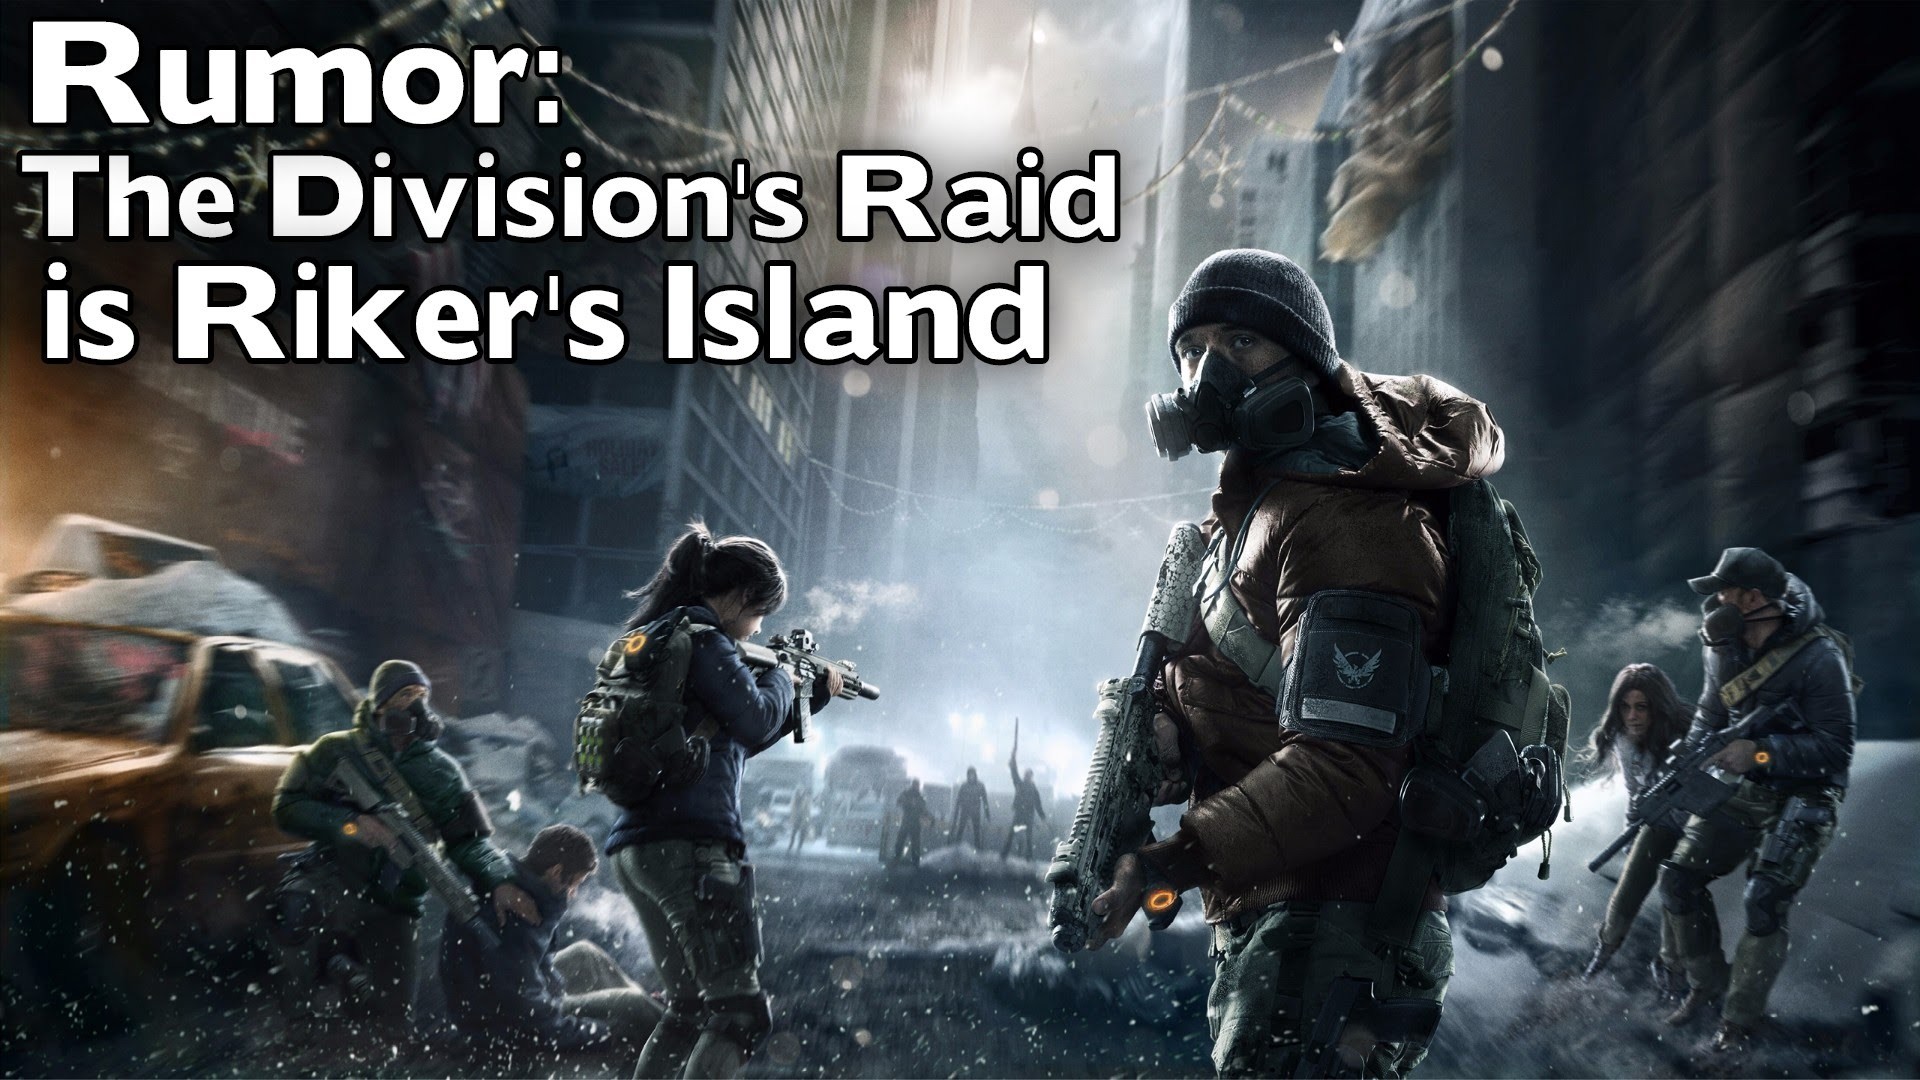 1920x1080 Rumor - The Division Raid On Rikers Island Prison? From A Massive  Developer? Unconfirmed Though